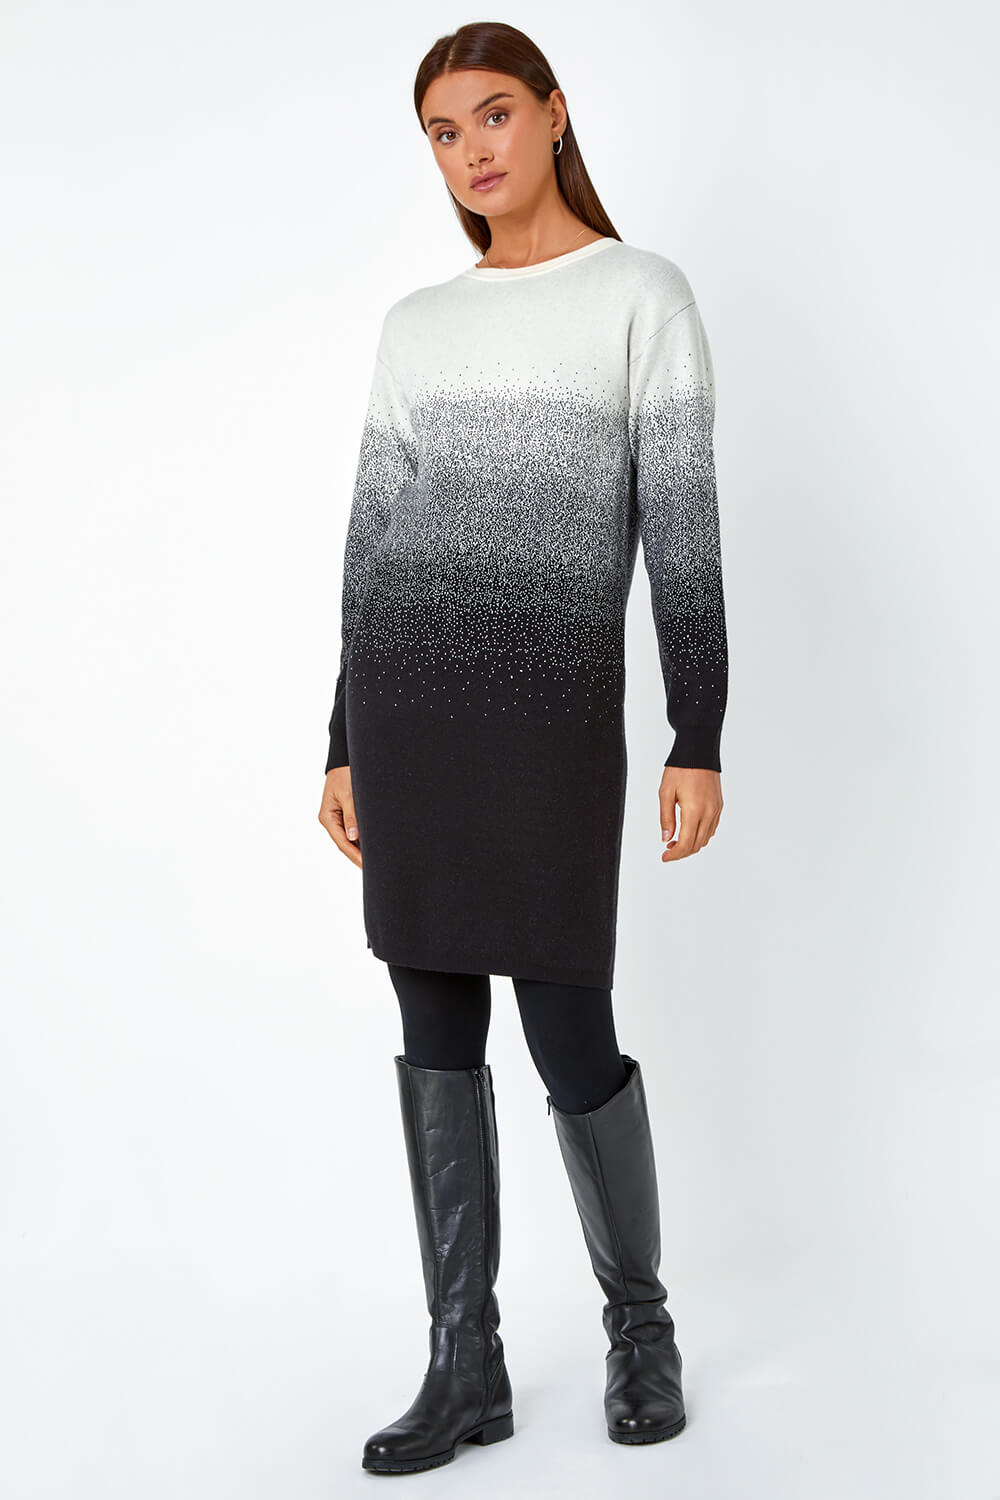 Ivory  Ombre Knitted Jumper Dress, Image 2 of 5